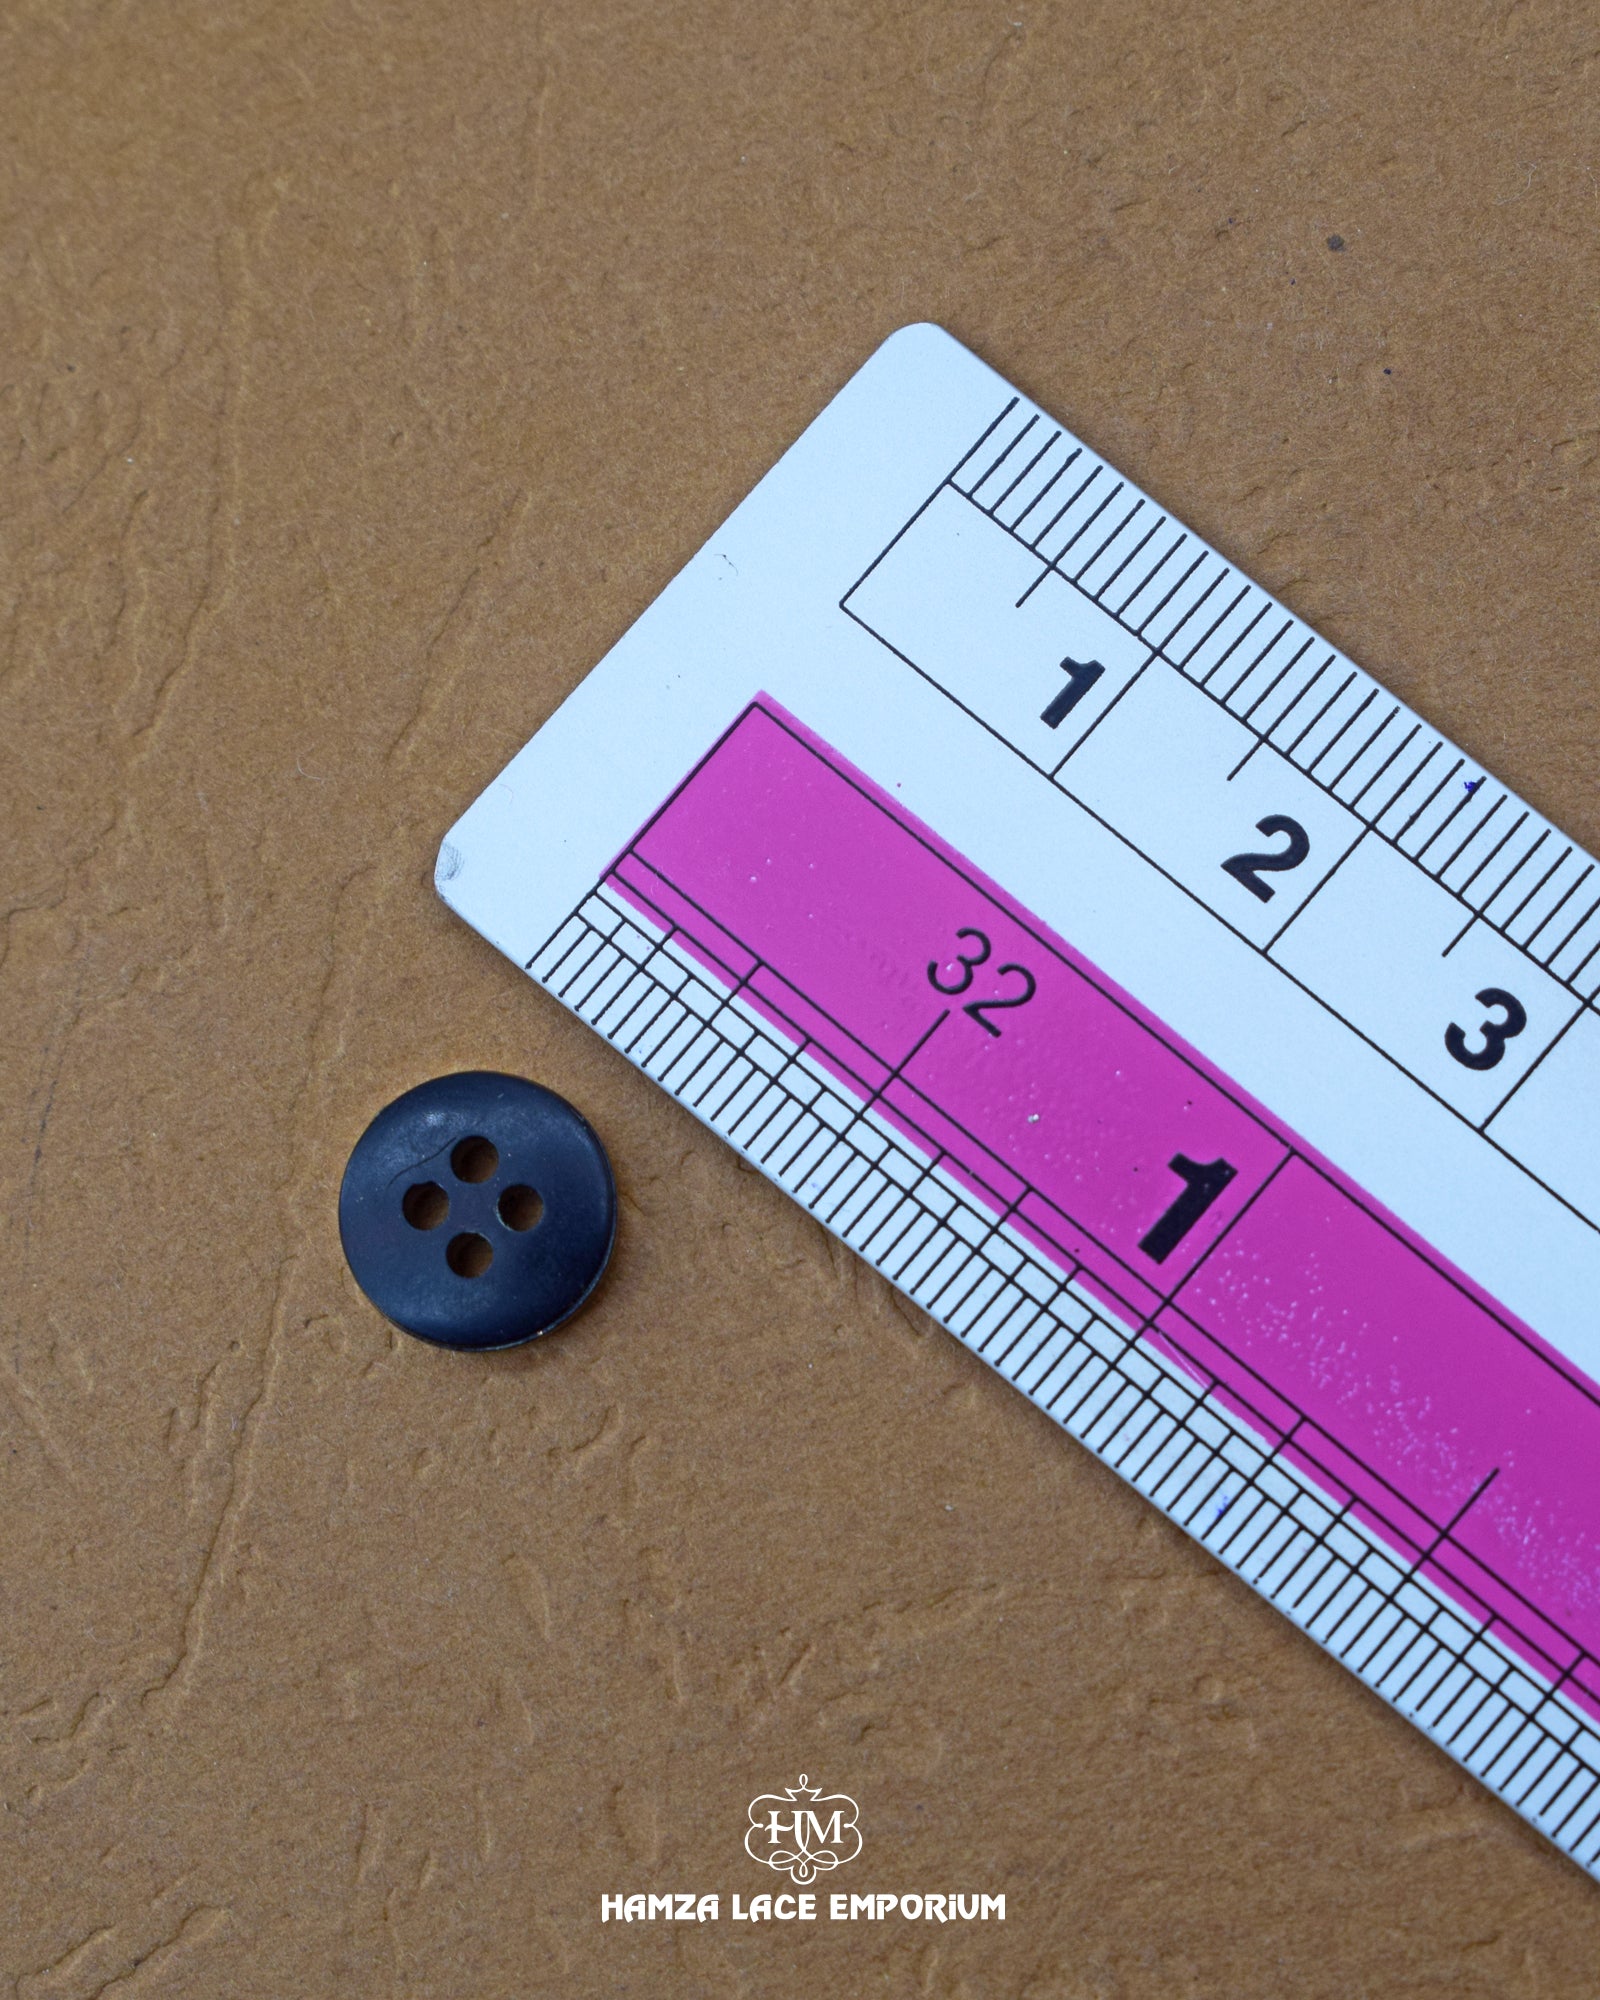 The size of the 'Four Hole Plastic Button MB839' is measured using a ruler.